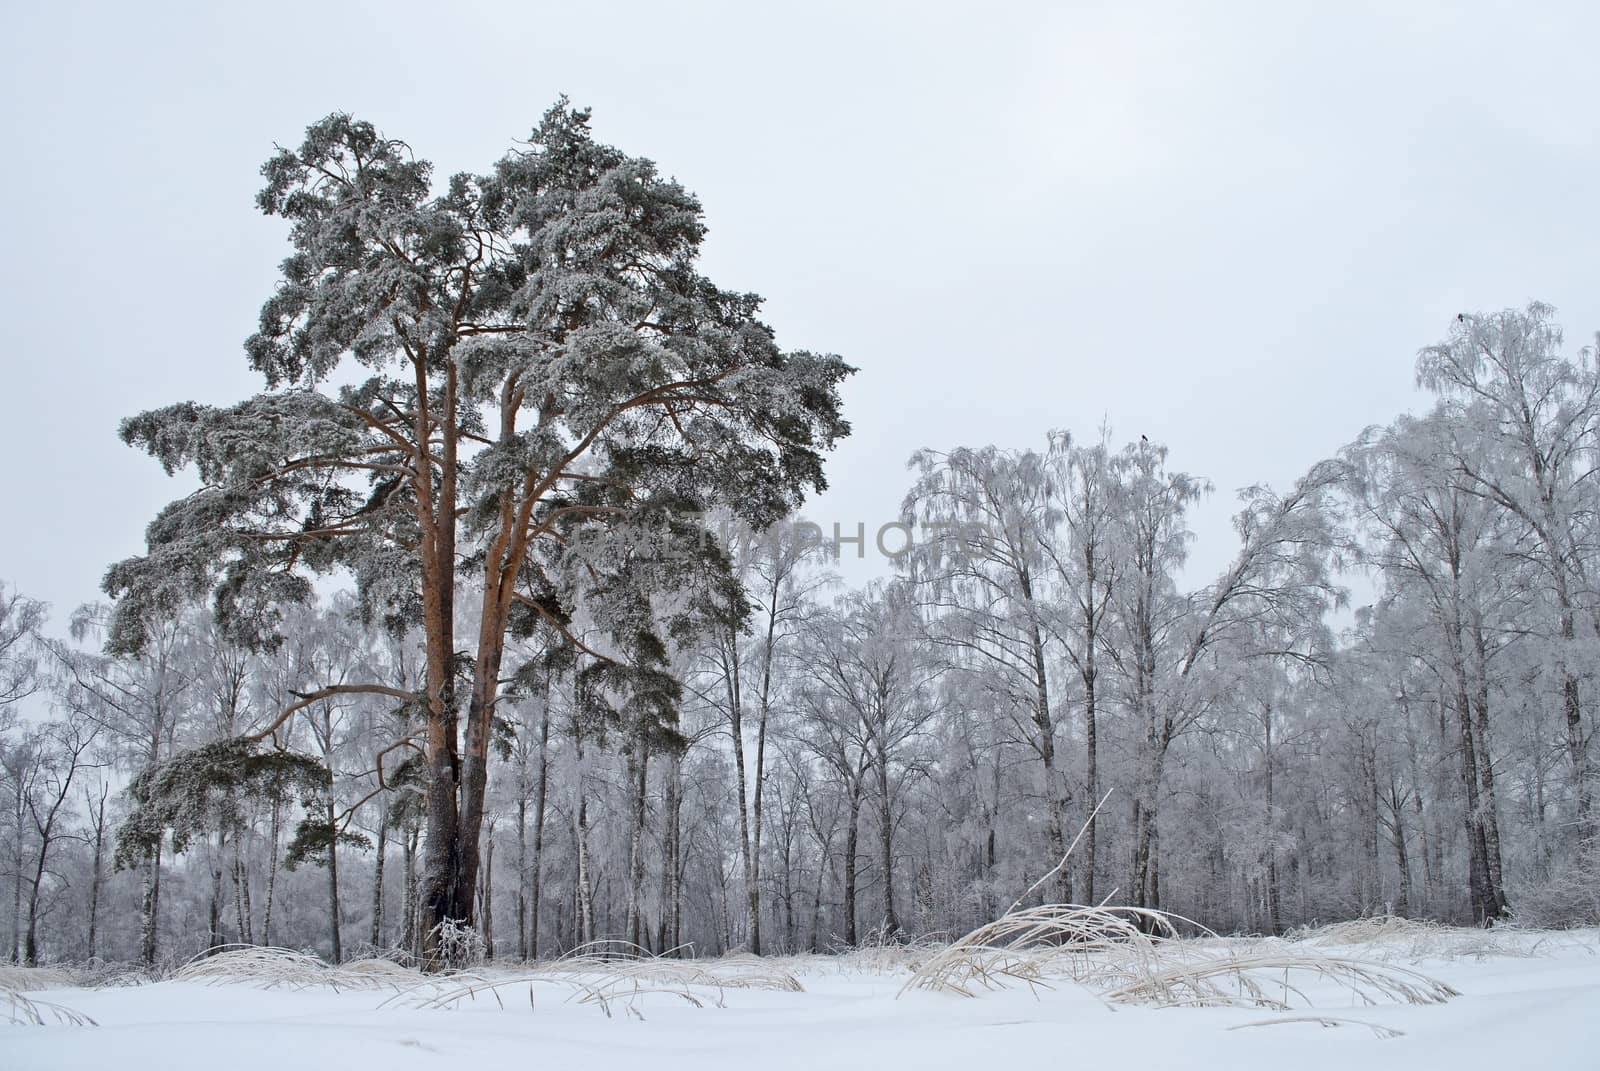 Pine tree against the snowy forest in winter time by wander